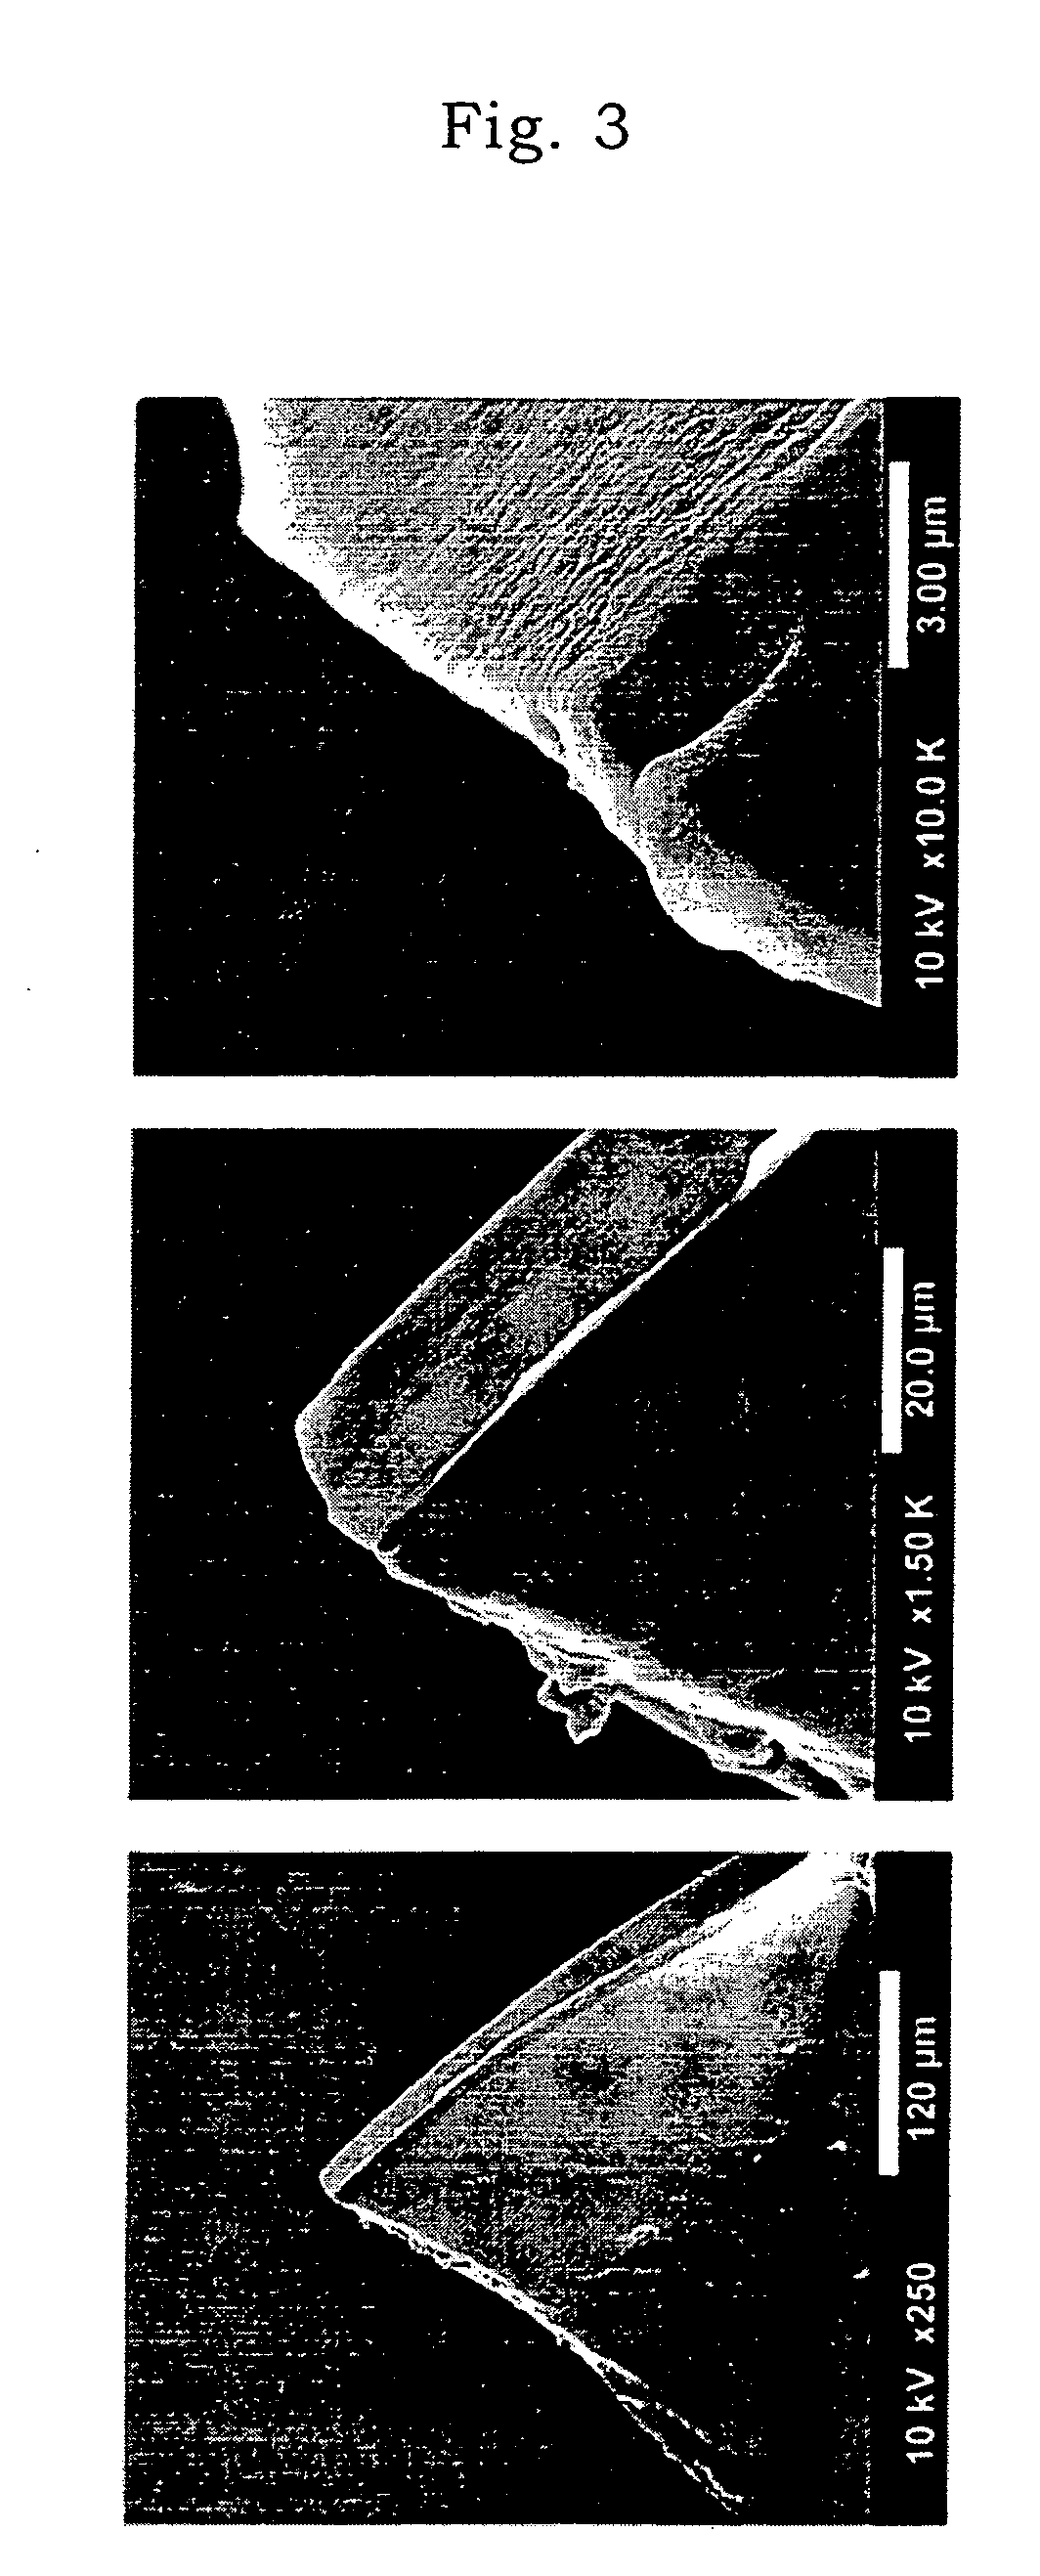 Polymerizable ion-conductive liquid-crystalline composite, anisotropically ion-conductive polymeric liquid-crystal composite, and process for producing the same